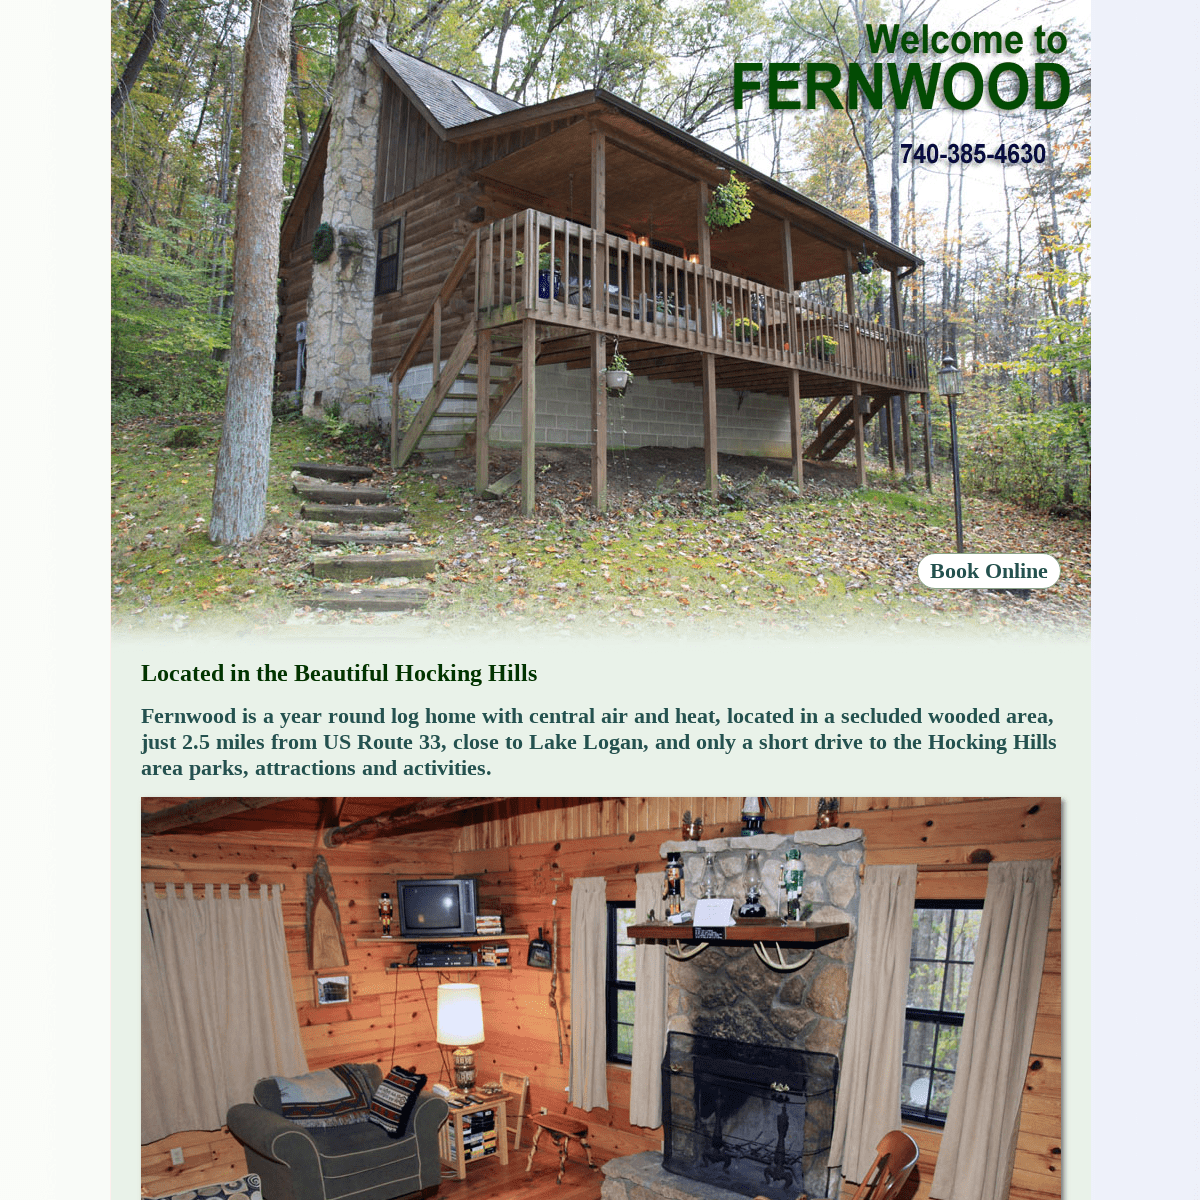 Fernwood Log Cabin - Located in the Hocking Hills